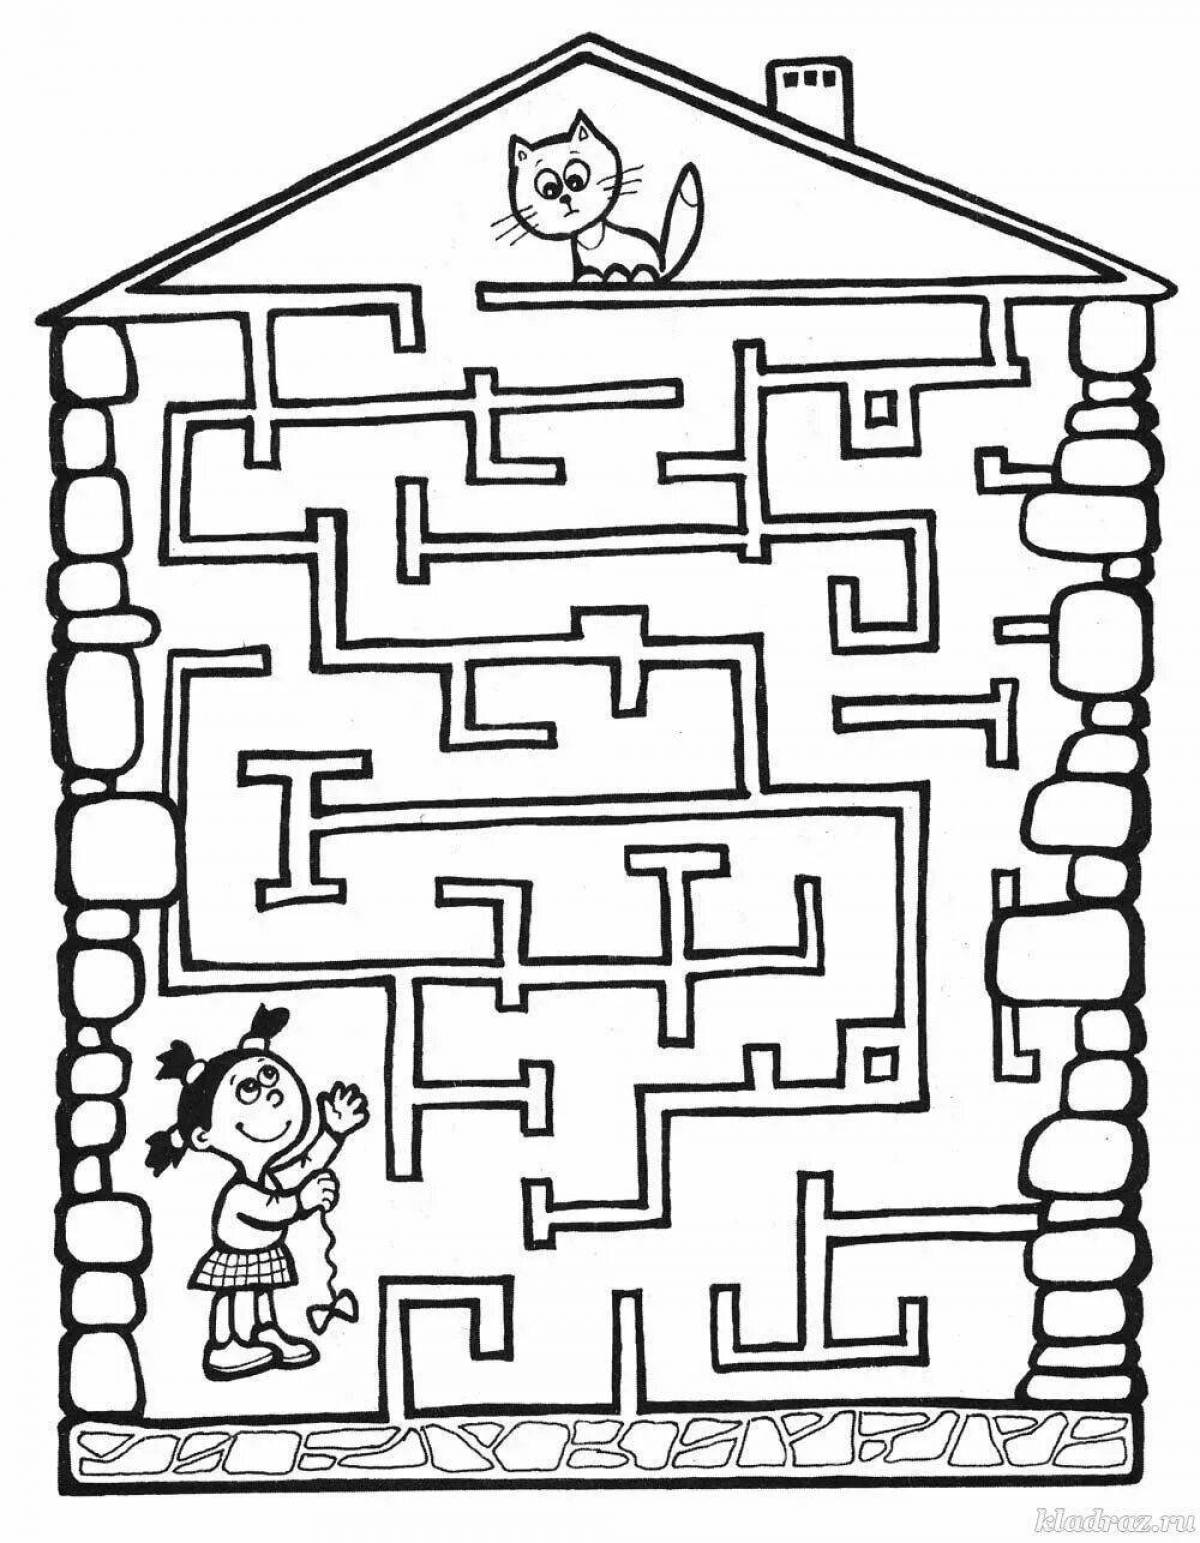 Brilliant maze coloring for 10 year olds